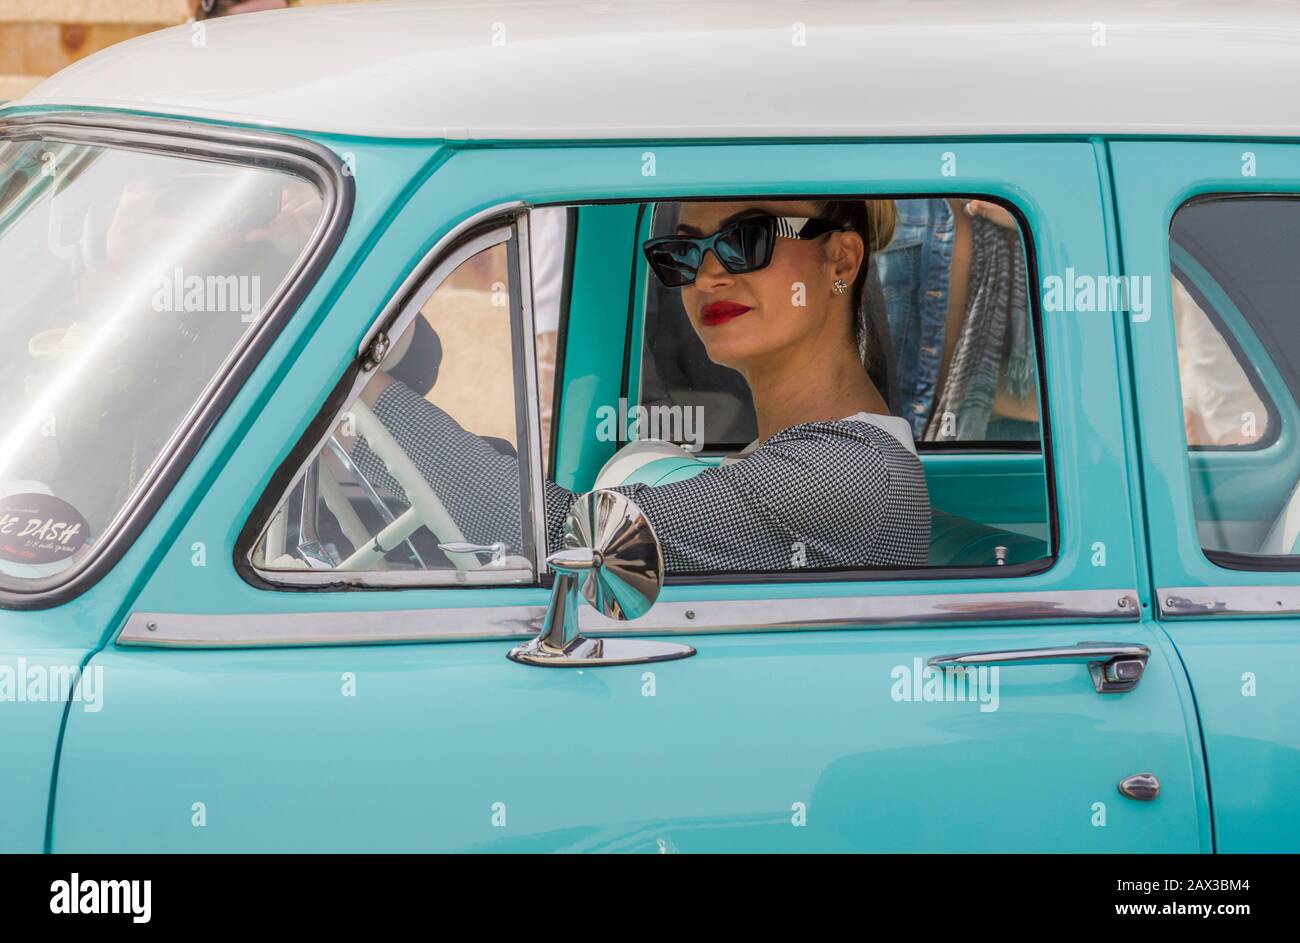 Woman in fifties style in classic car of the fifties driving, Torremolinos, spain. Stock Photo